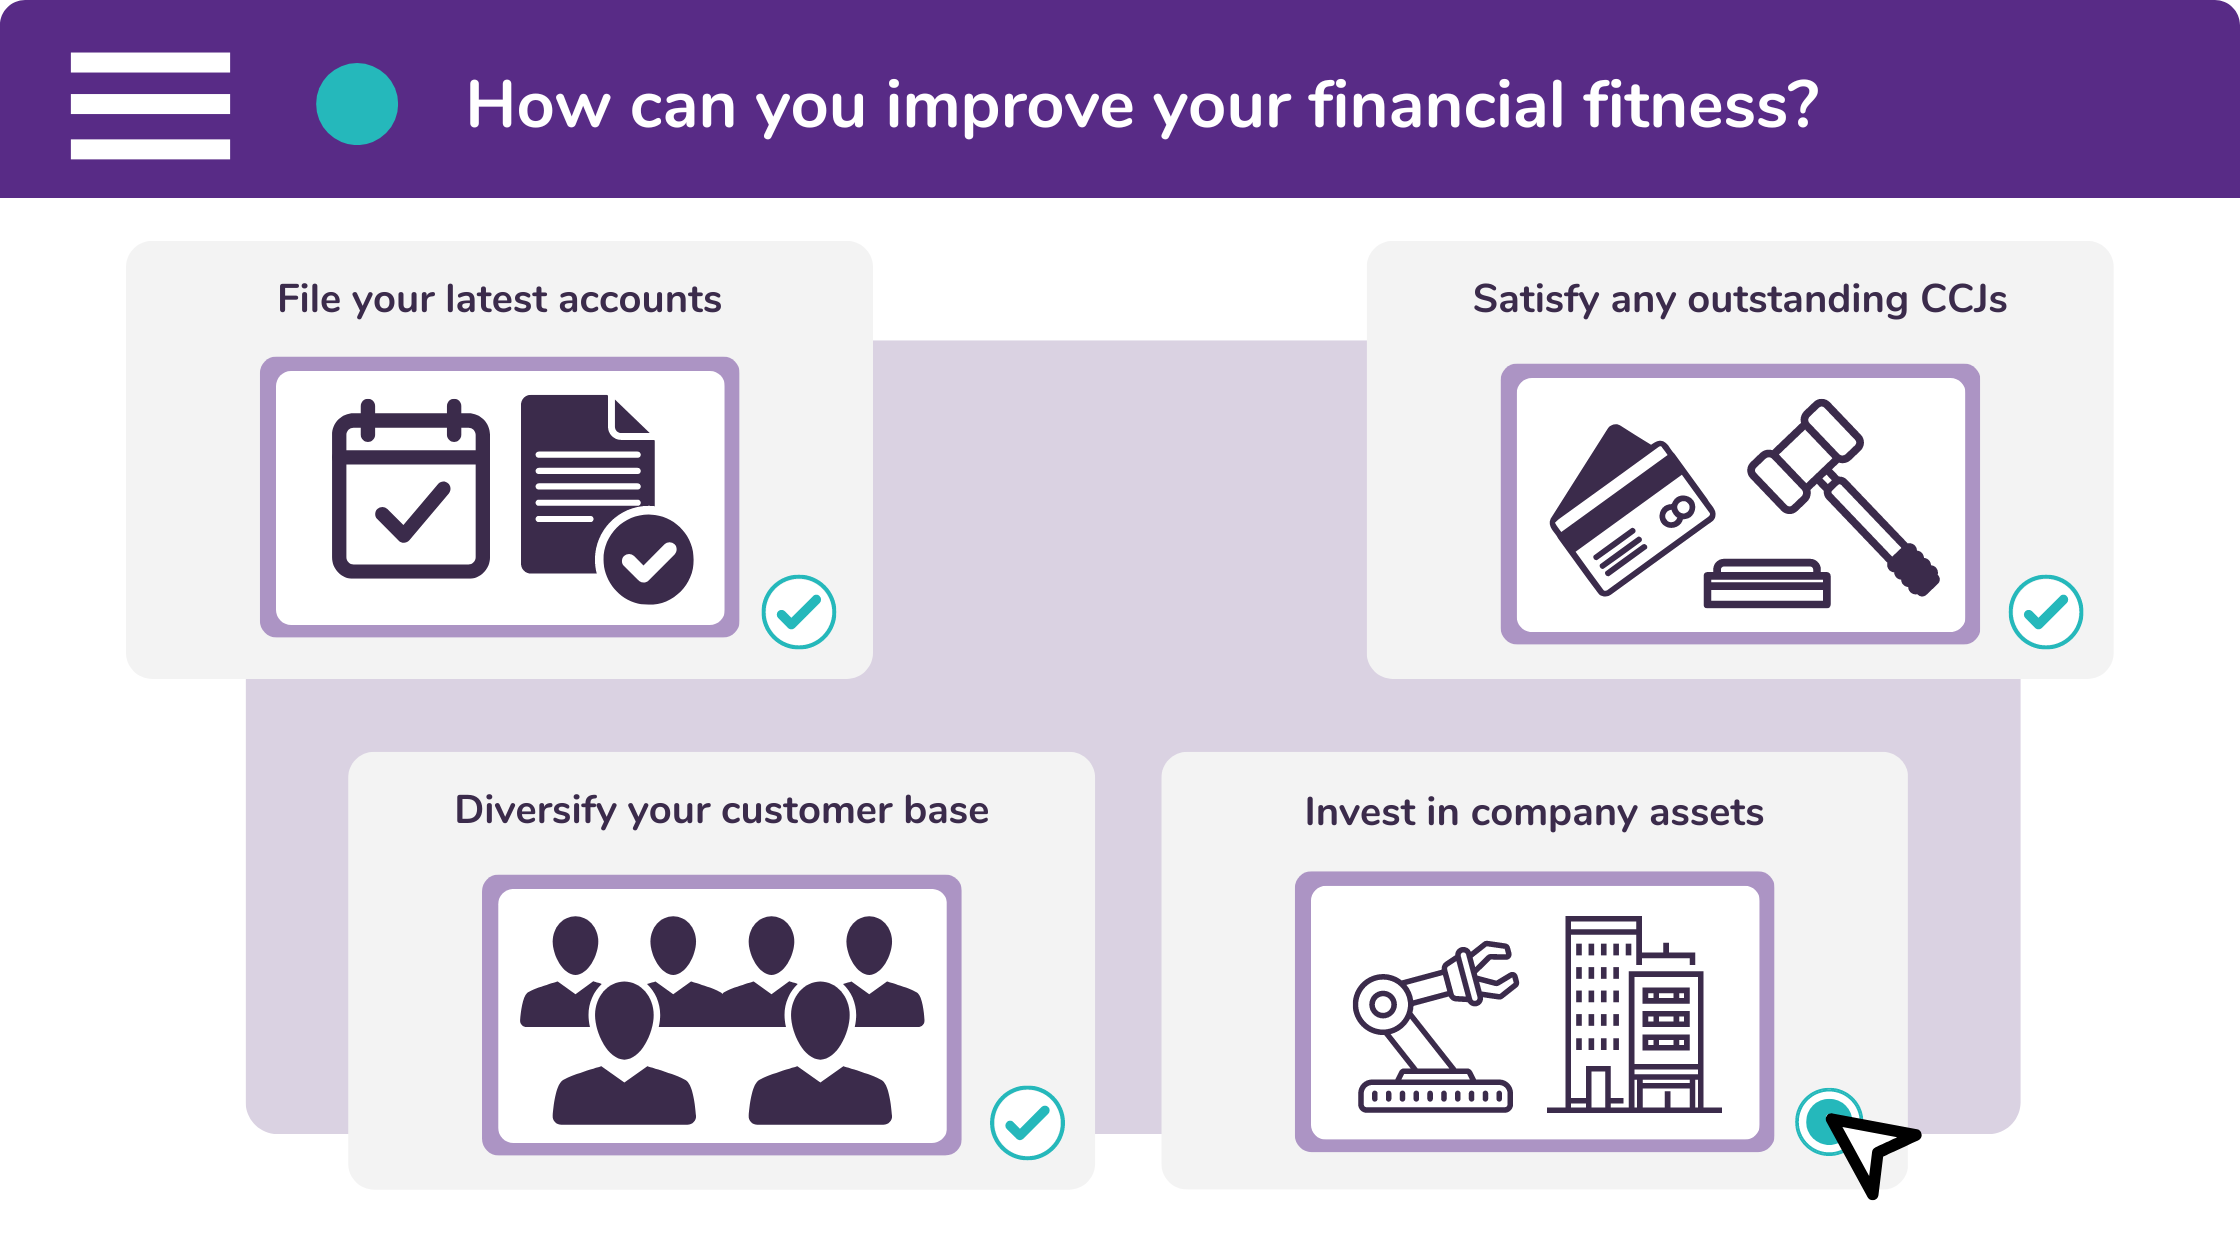 There are four tactics to improve your financial fitness.